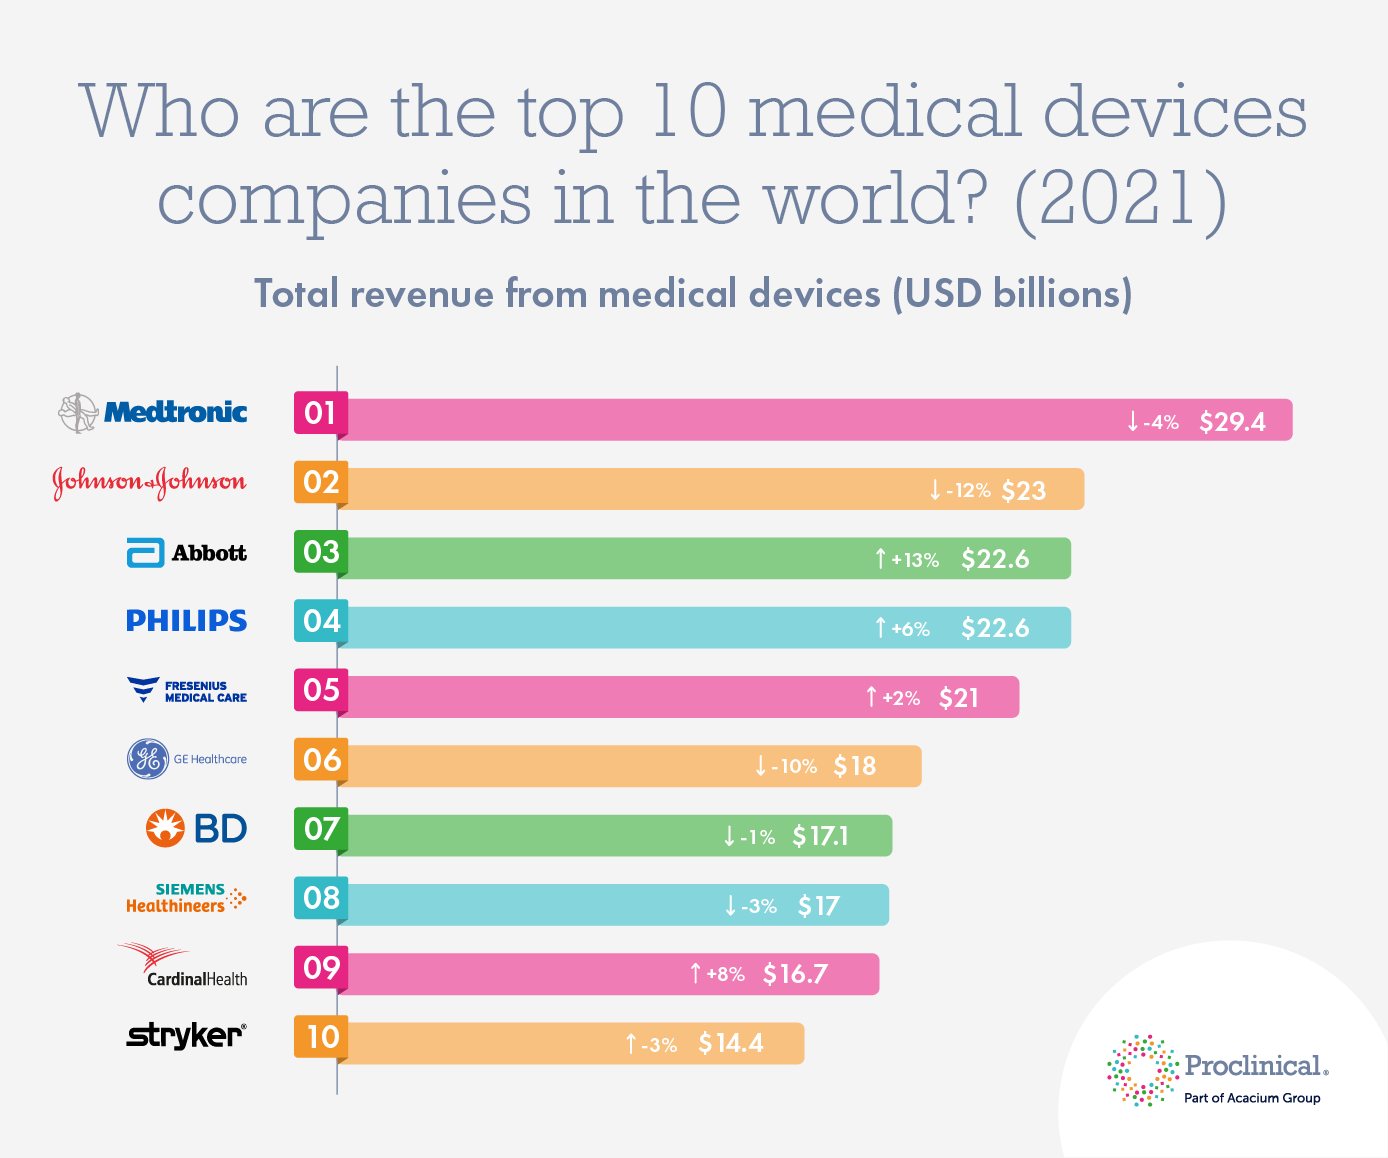 are the top 10 medical companies in the world (2021)? Proclinical Blogs